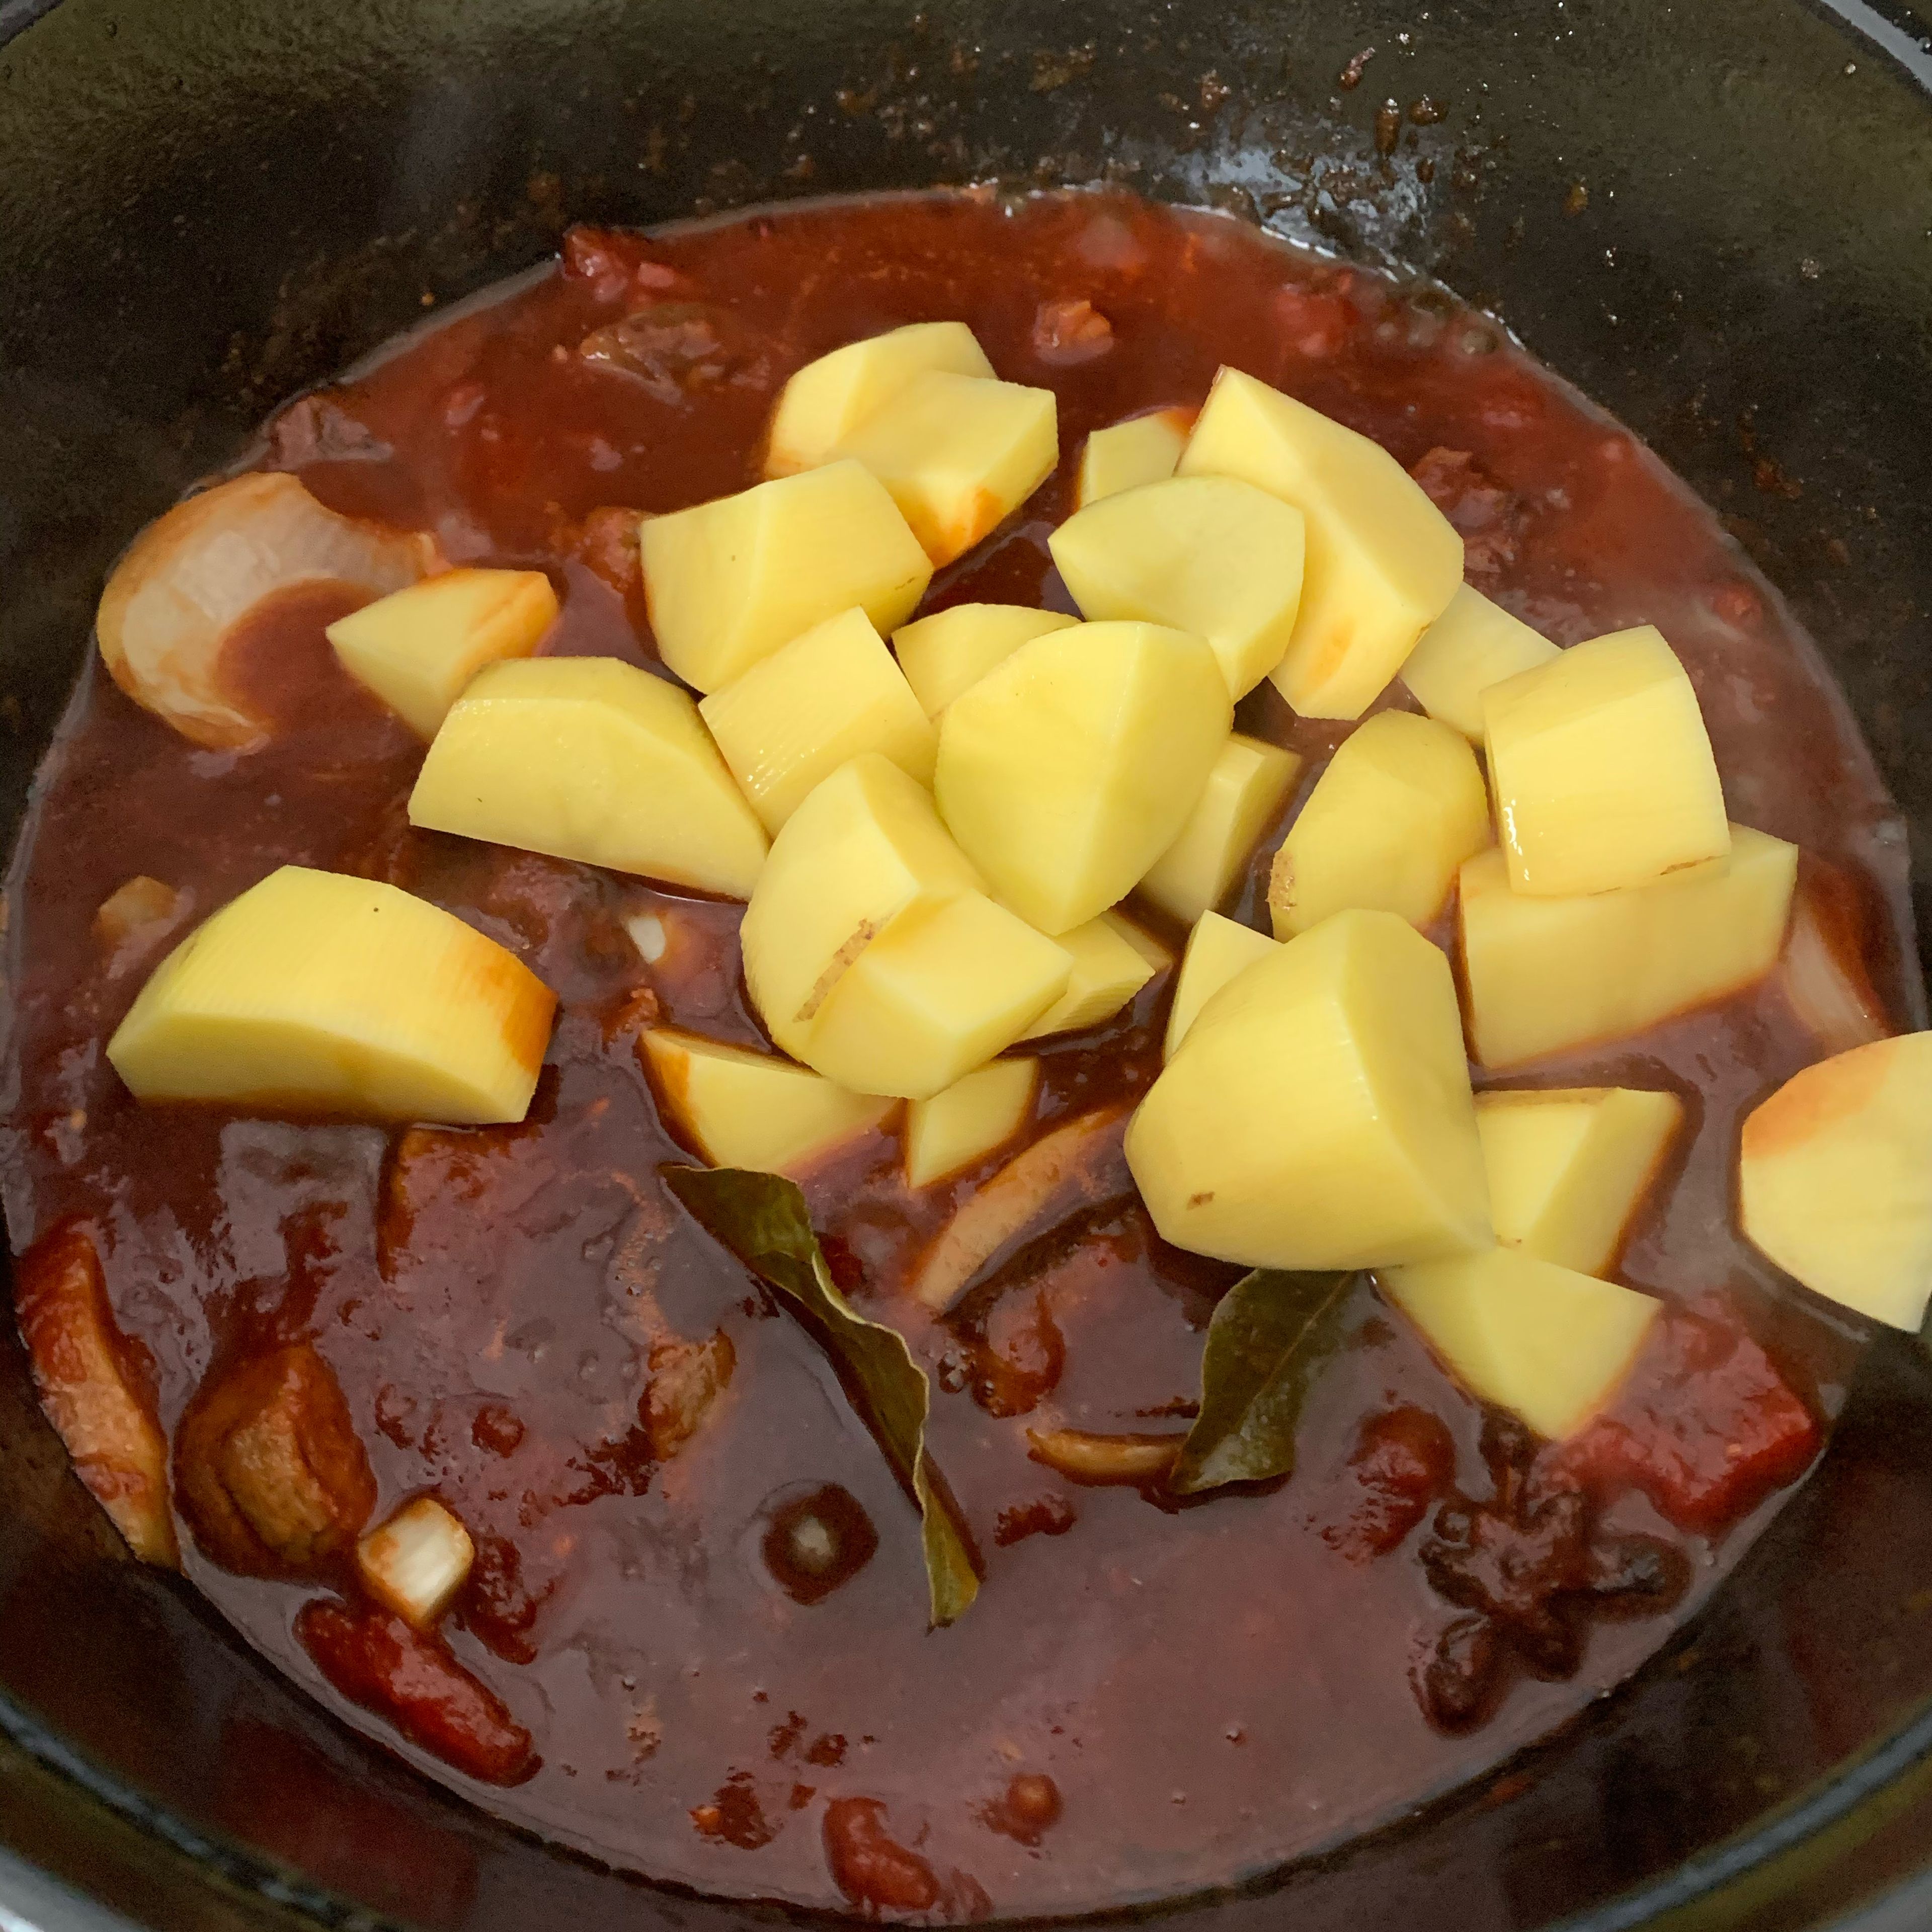 Add canned diced tomatoes with light soy sauce, dark soy sauce, remaining shaoxing wine. At last, add potatoes. Stir everything to combine. Bring to a boil. Cover with lid and simmer over low heat for 45 min. to 1 hour. If the stew is too dry, add some boiling water.